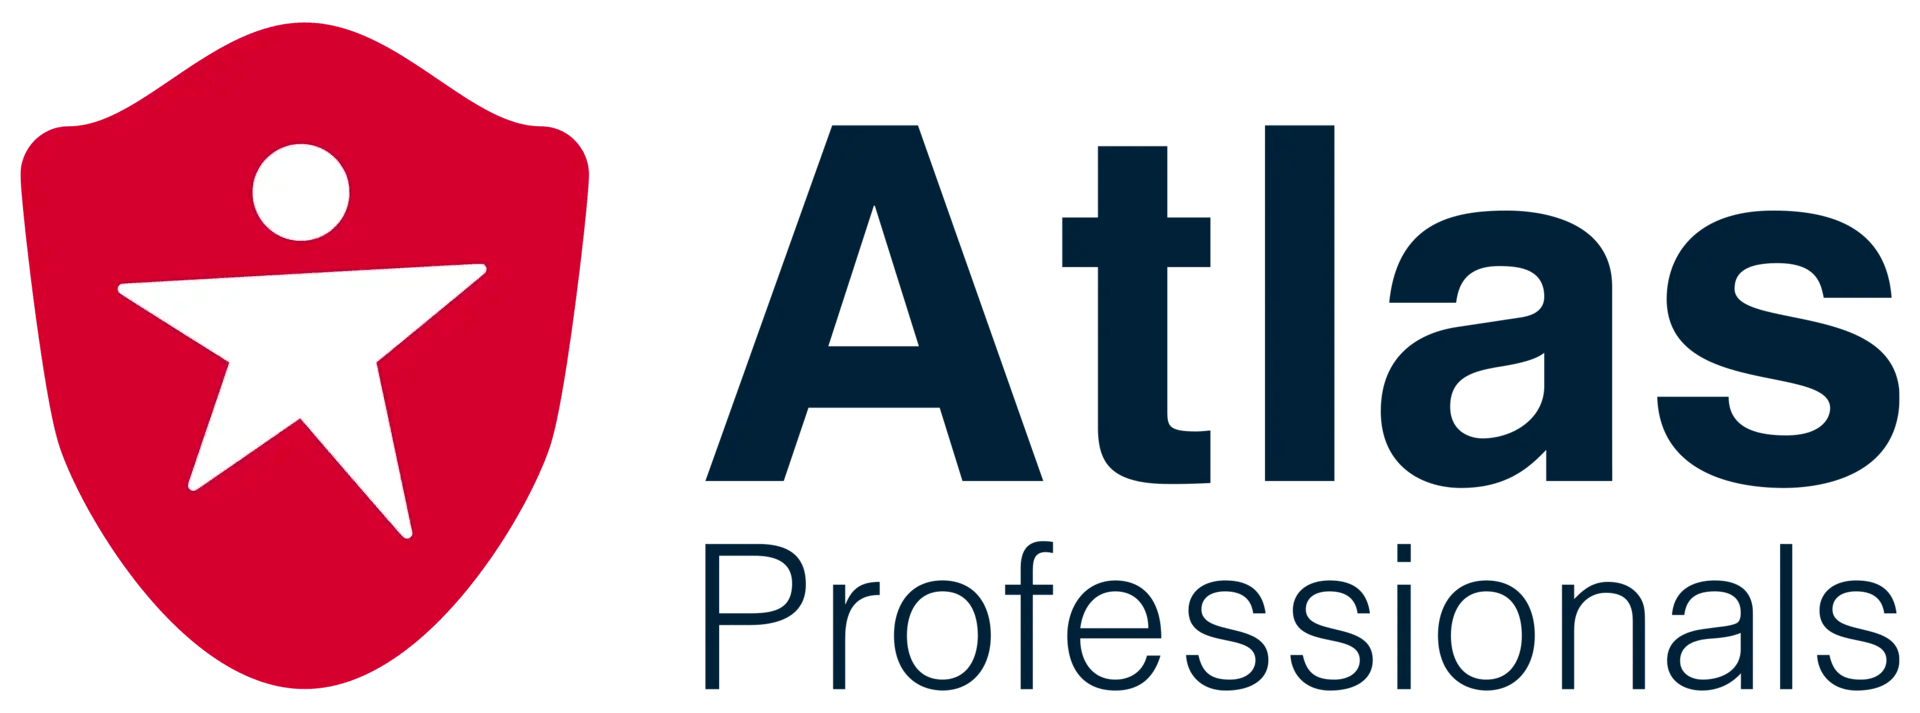 Atlas professionals: Specialist recruitment and HR services in Energy & Marine industries